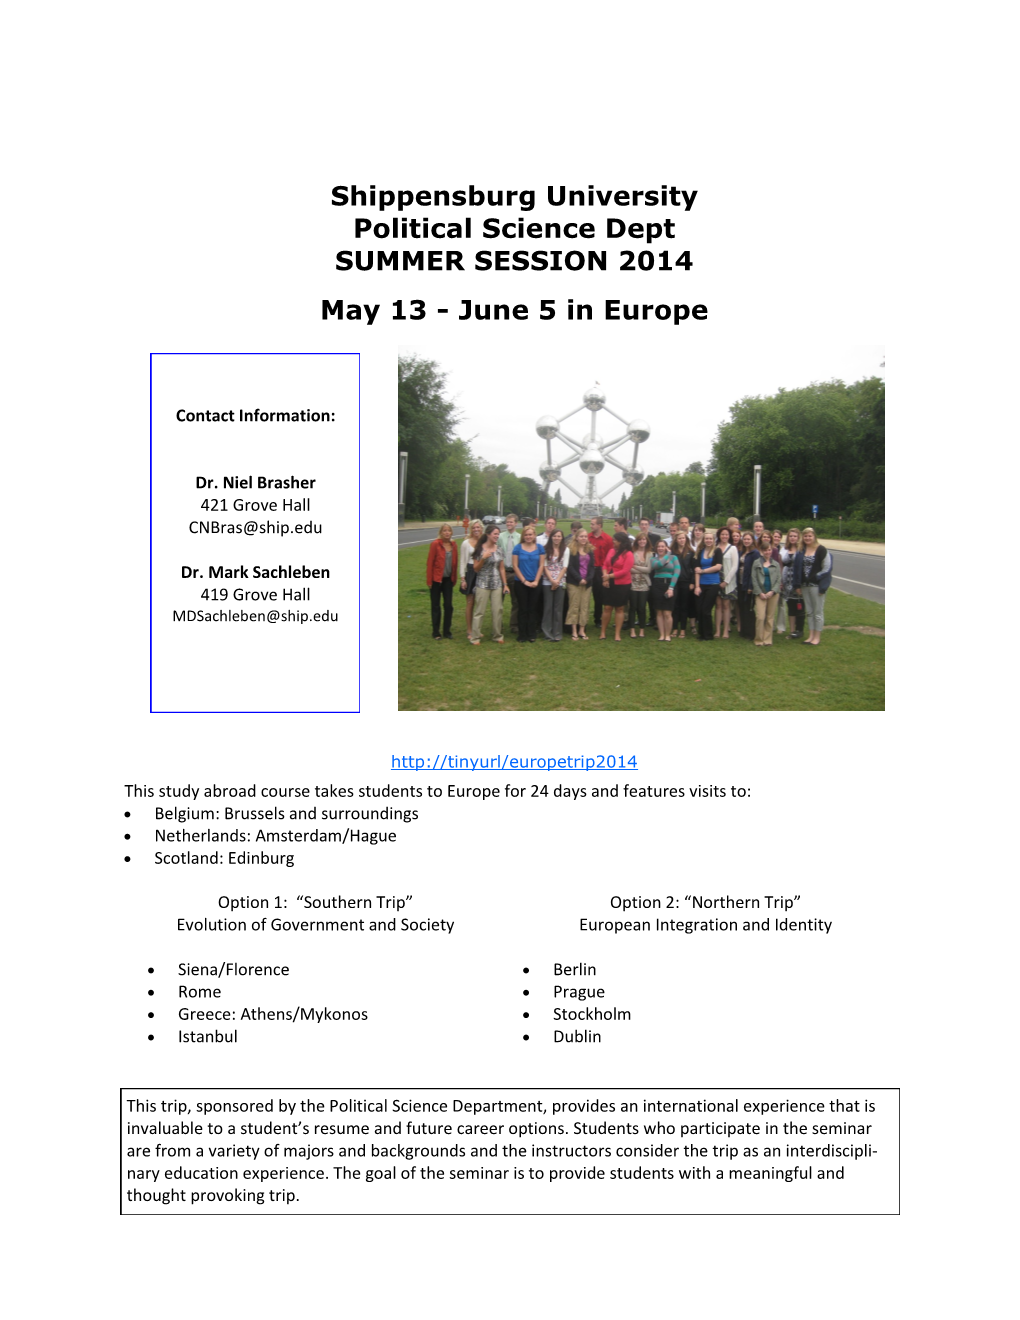 Shippensburg University Political Science Dept SUMMER SESSION 2014 May 13 - June 5 in Europe